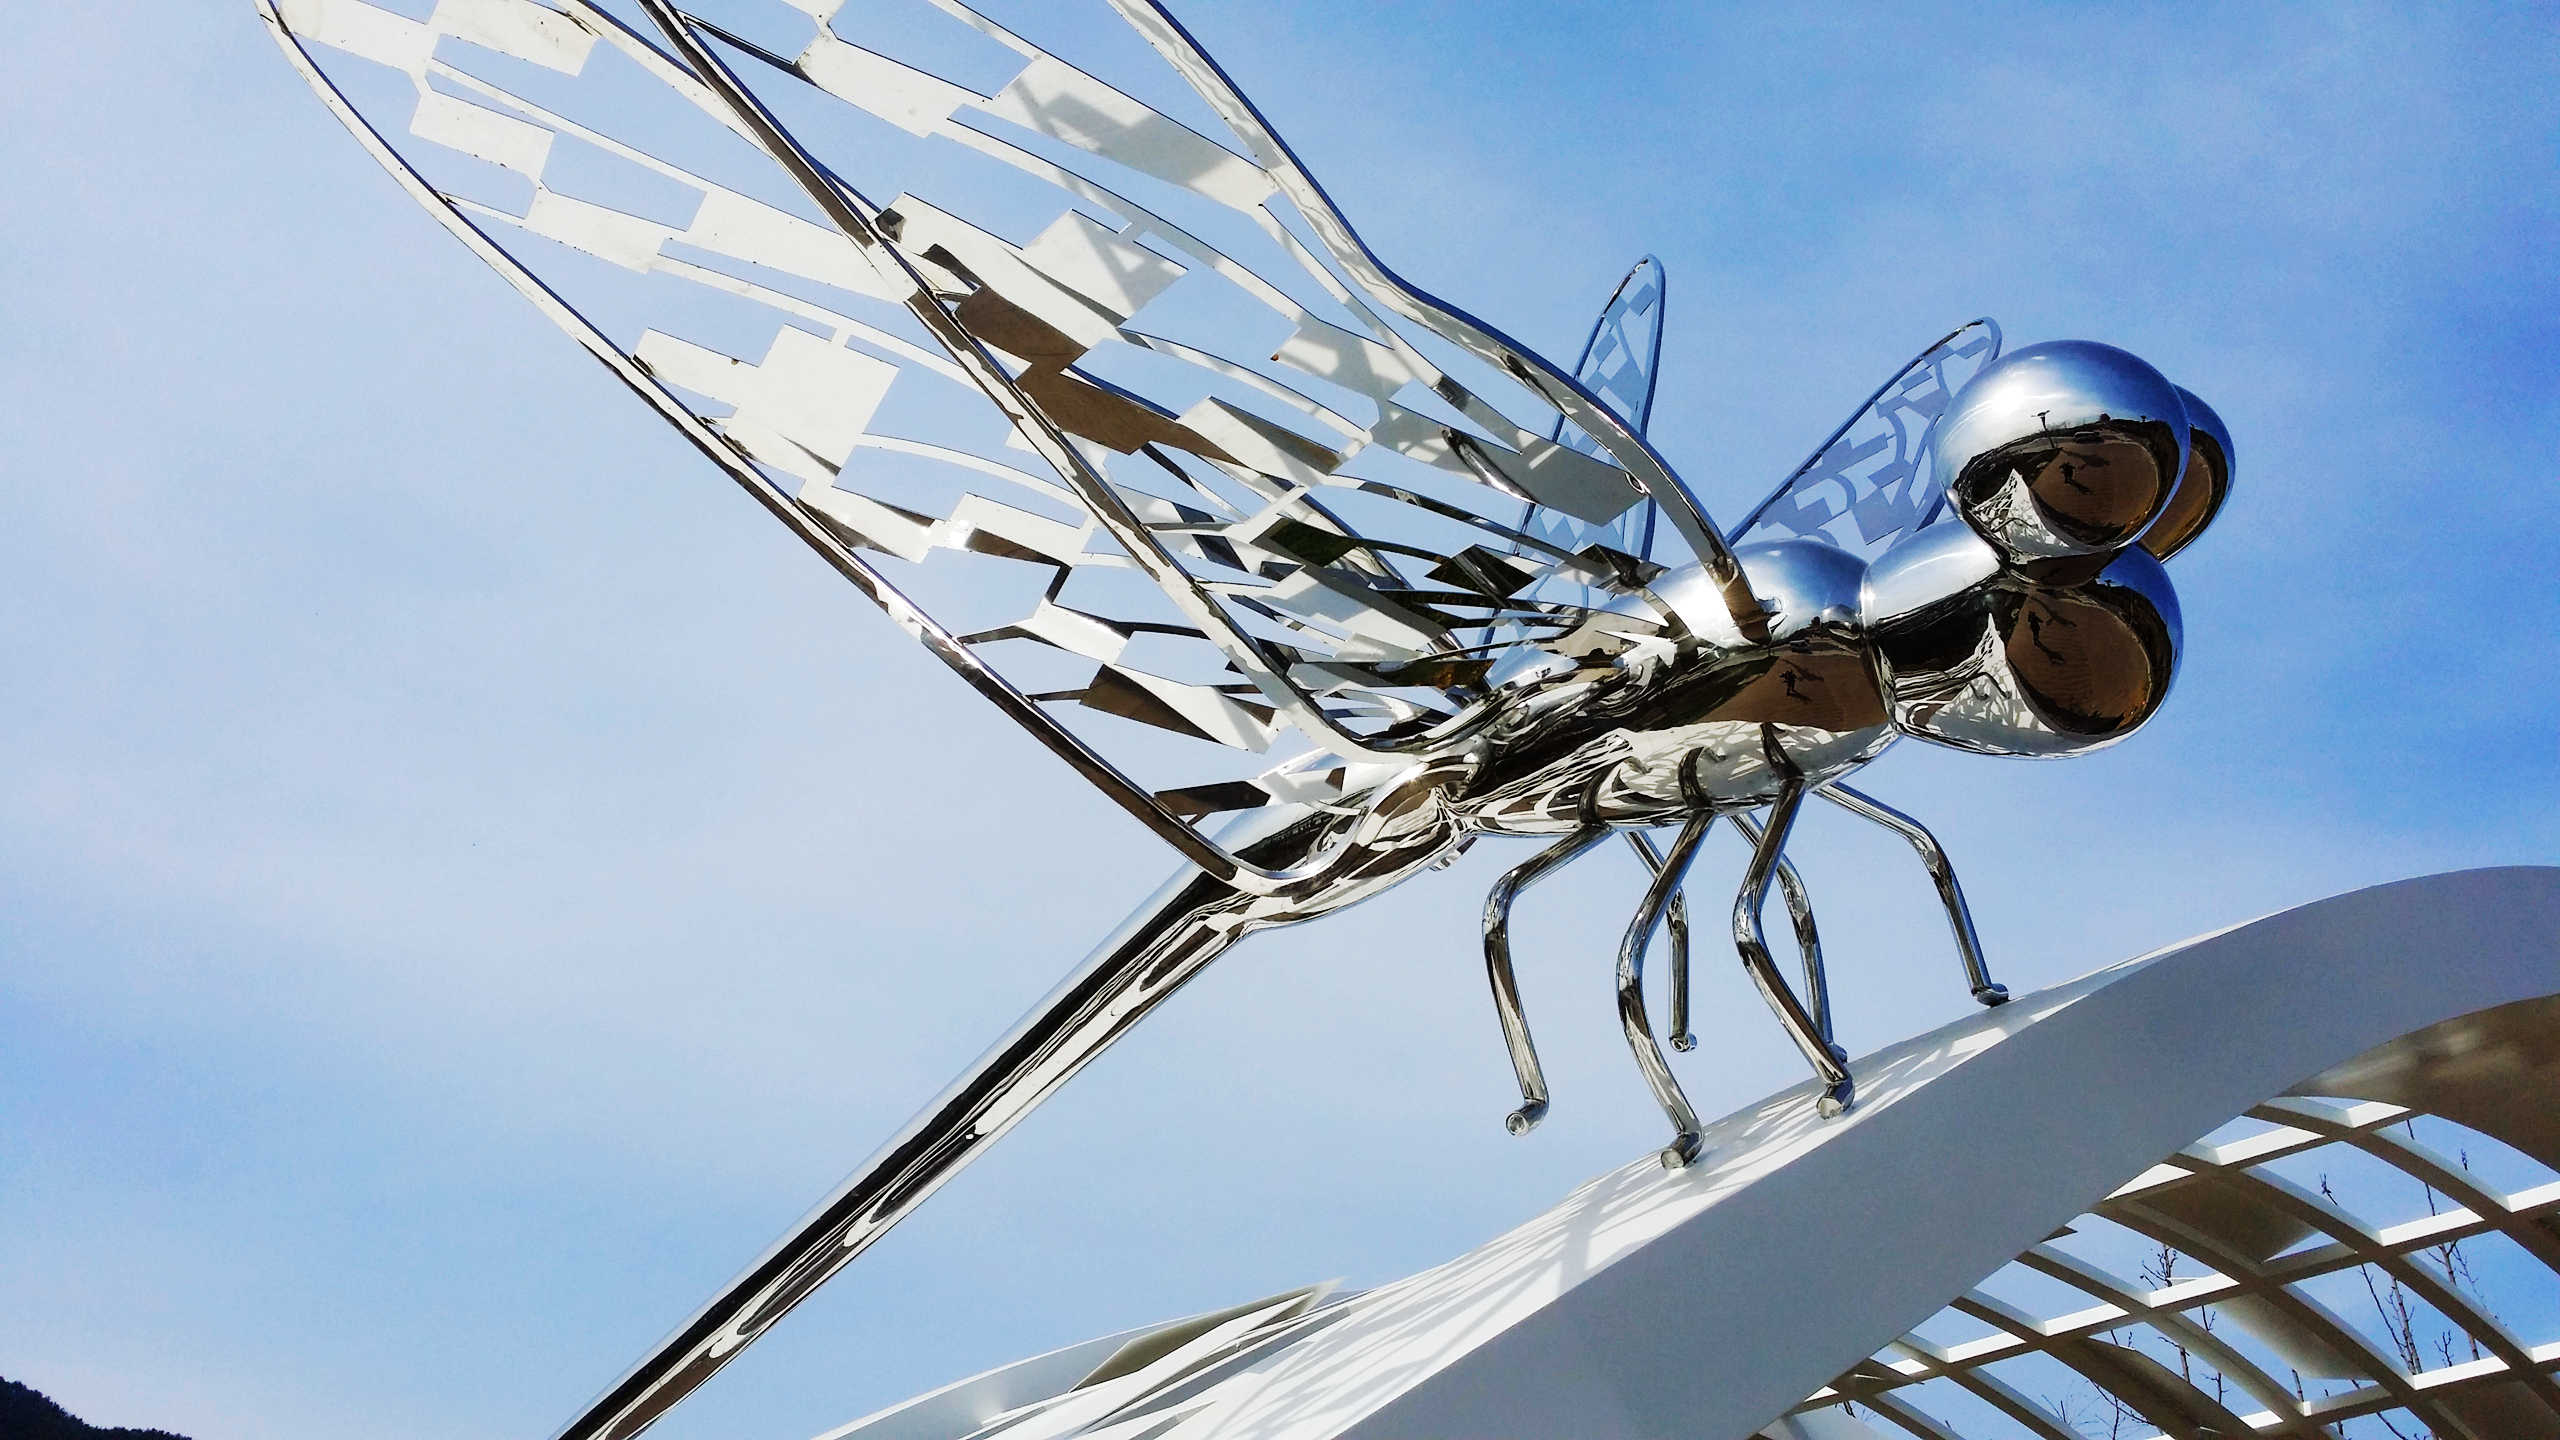 Mirror Polishing & Painting Stainless Steel Sculpture-Summer time